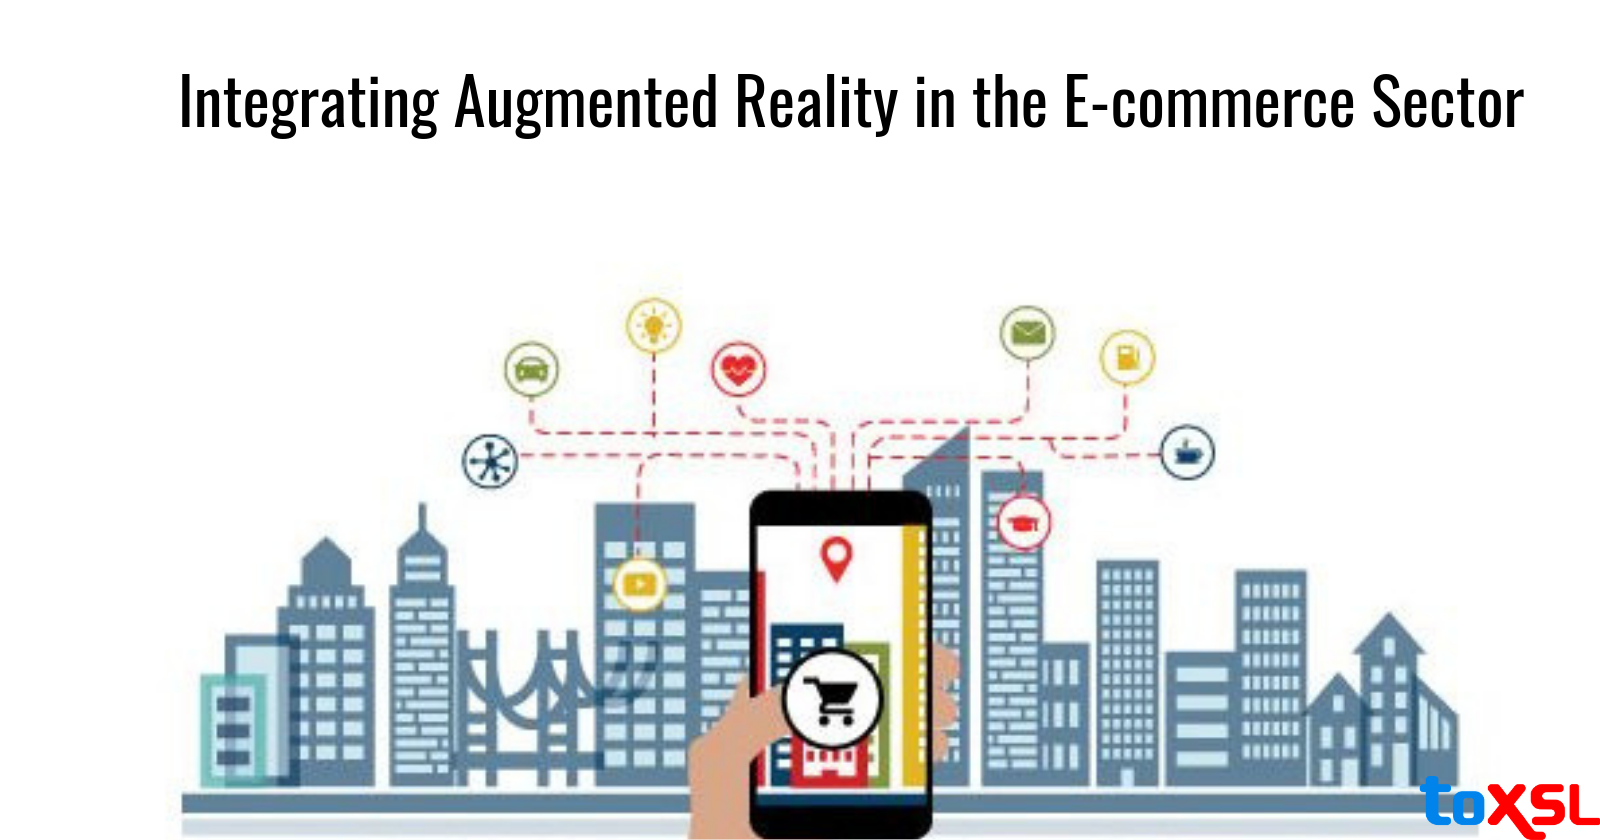 How Augmented Reality Will Revolutionize the E-commerce Industry